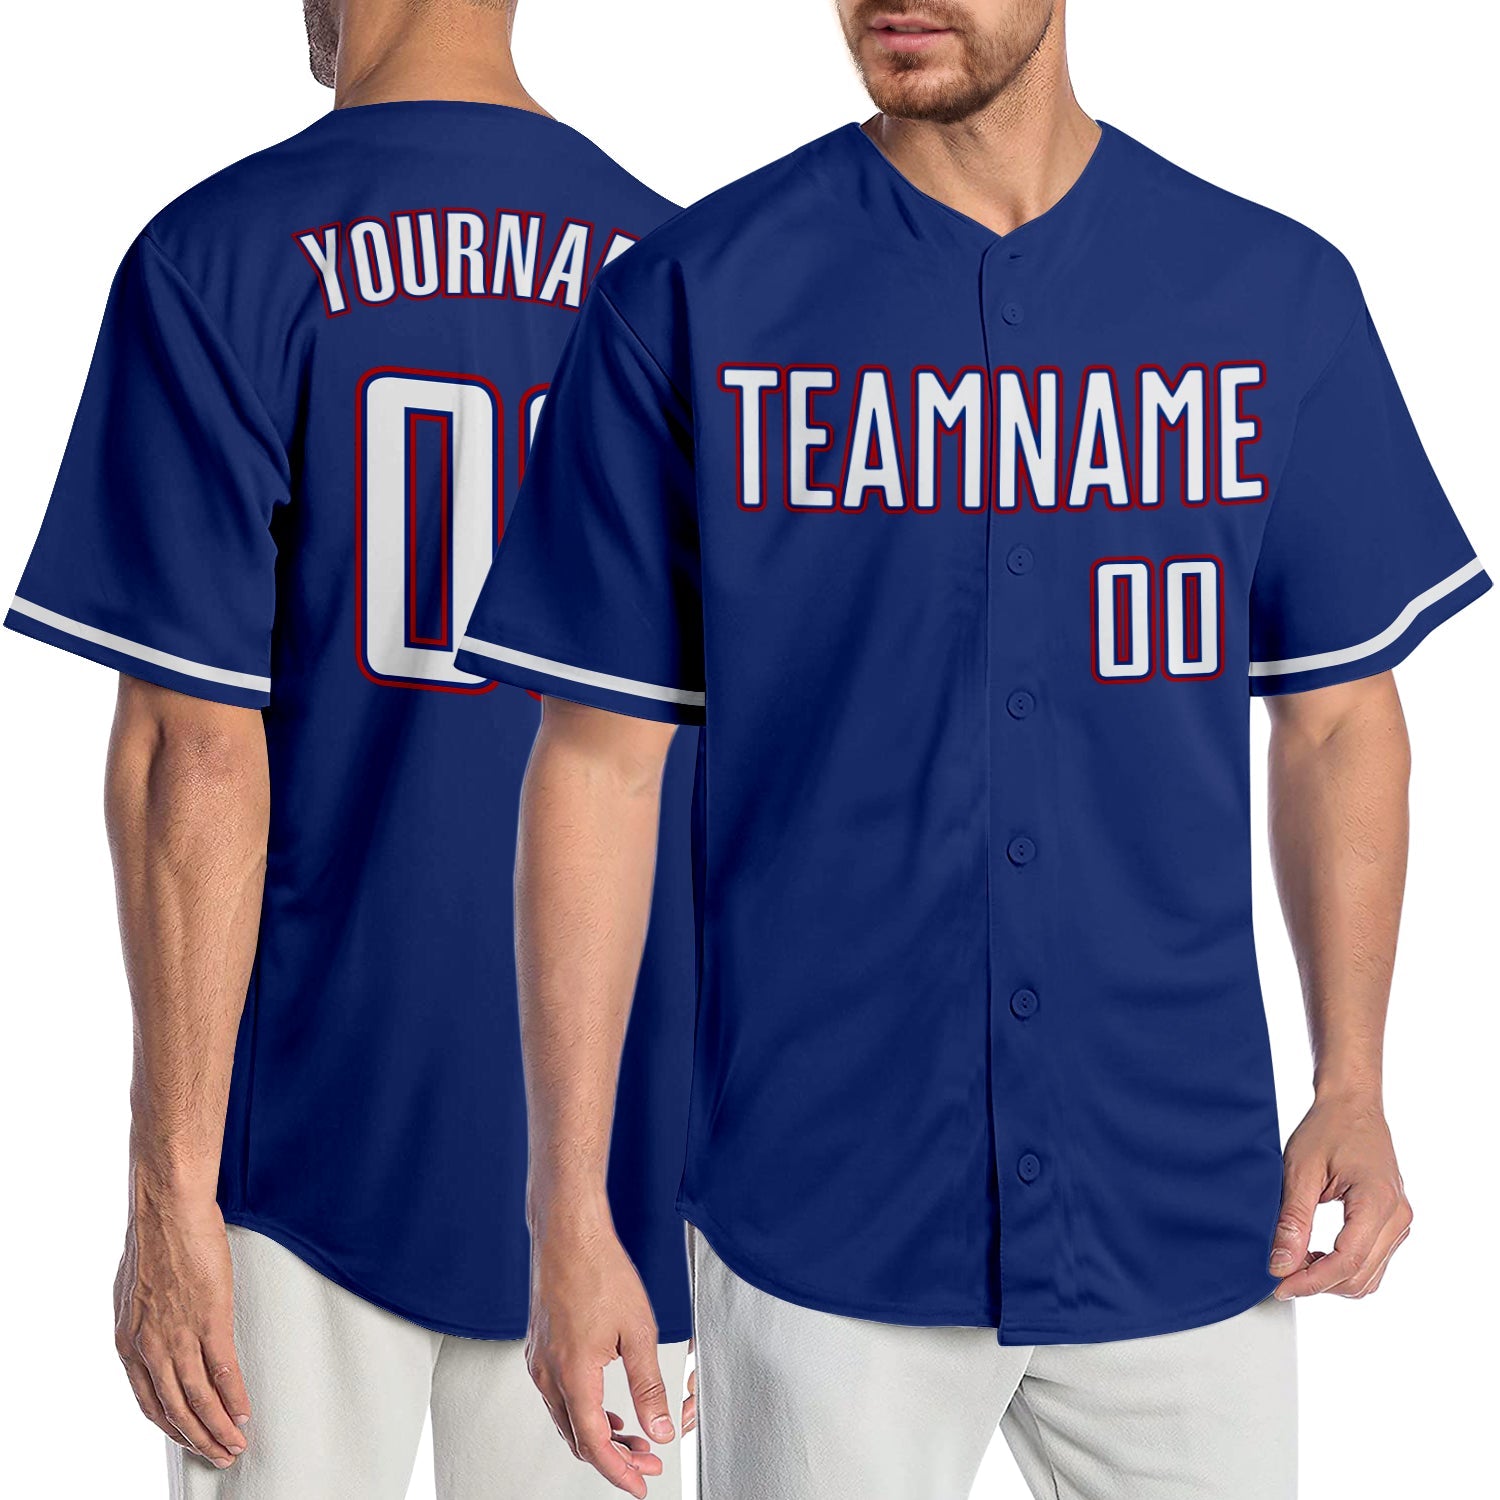 Custom Royal White-Red Authentic Baseball Jersey